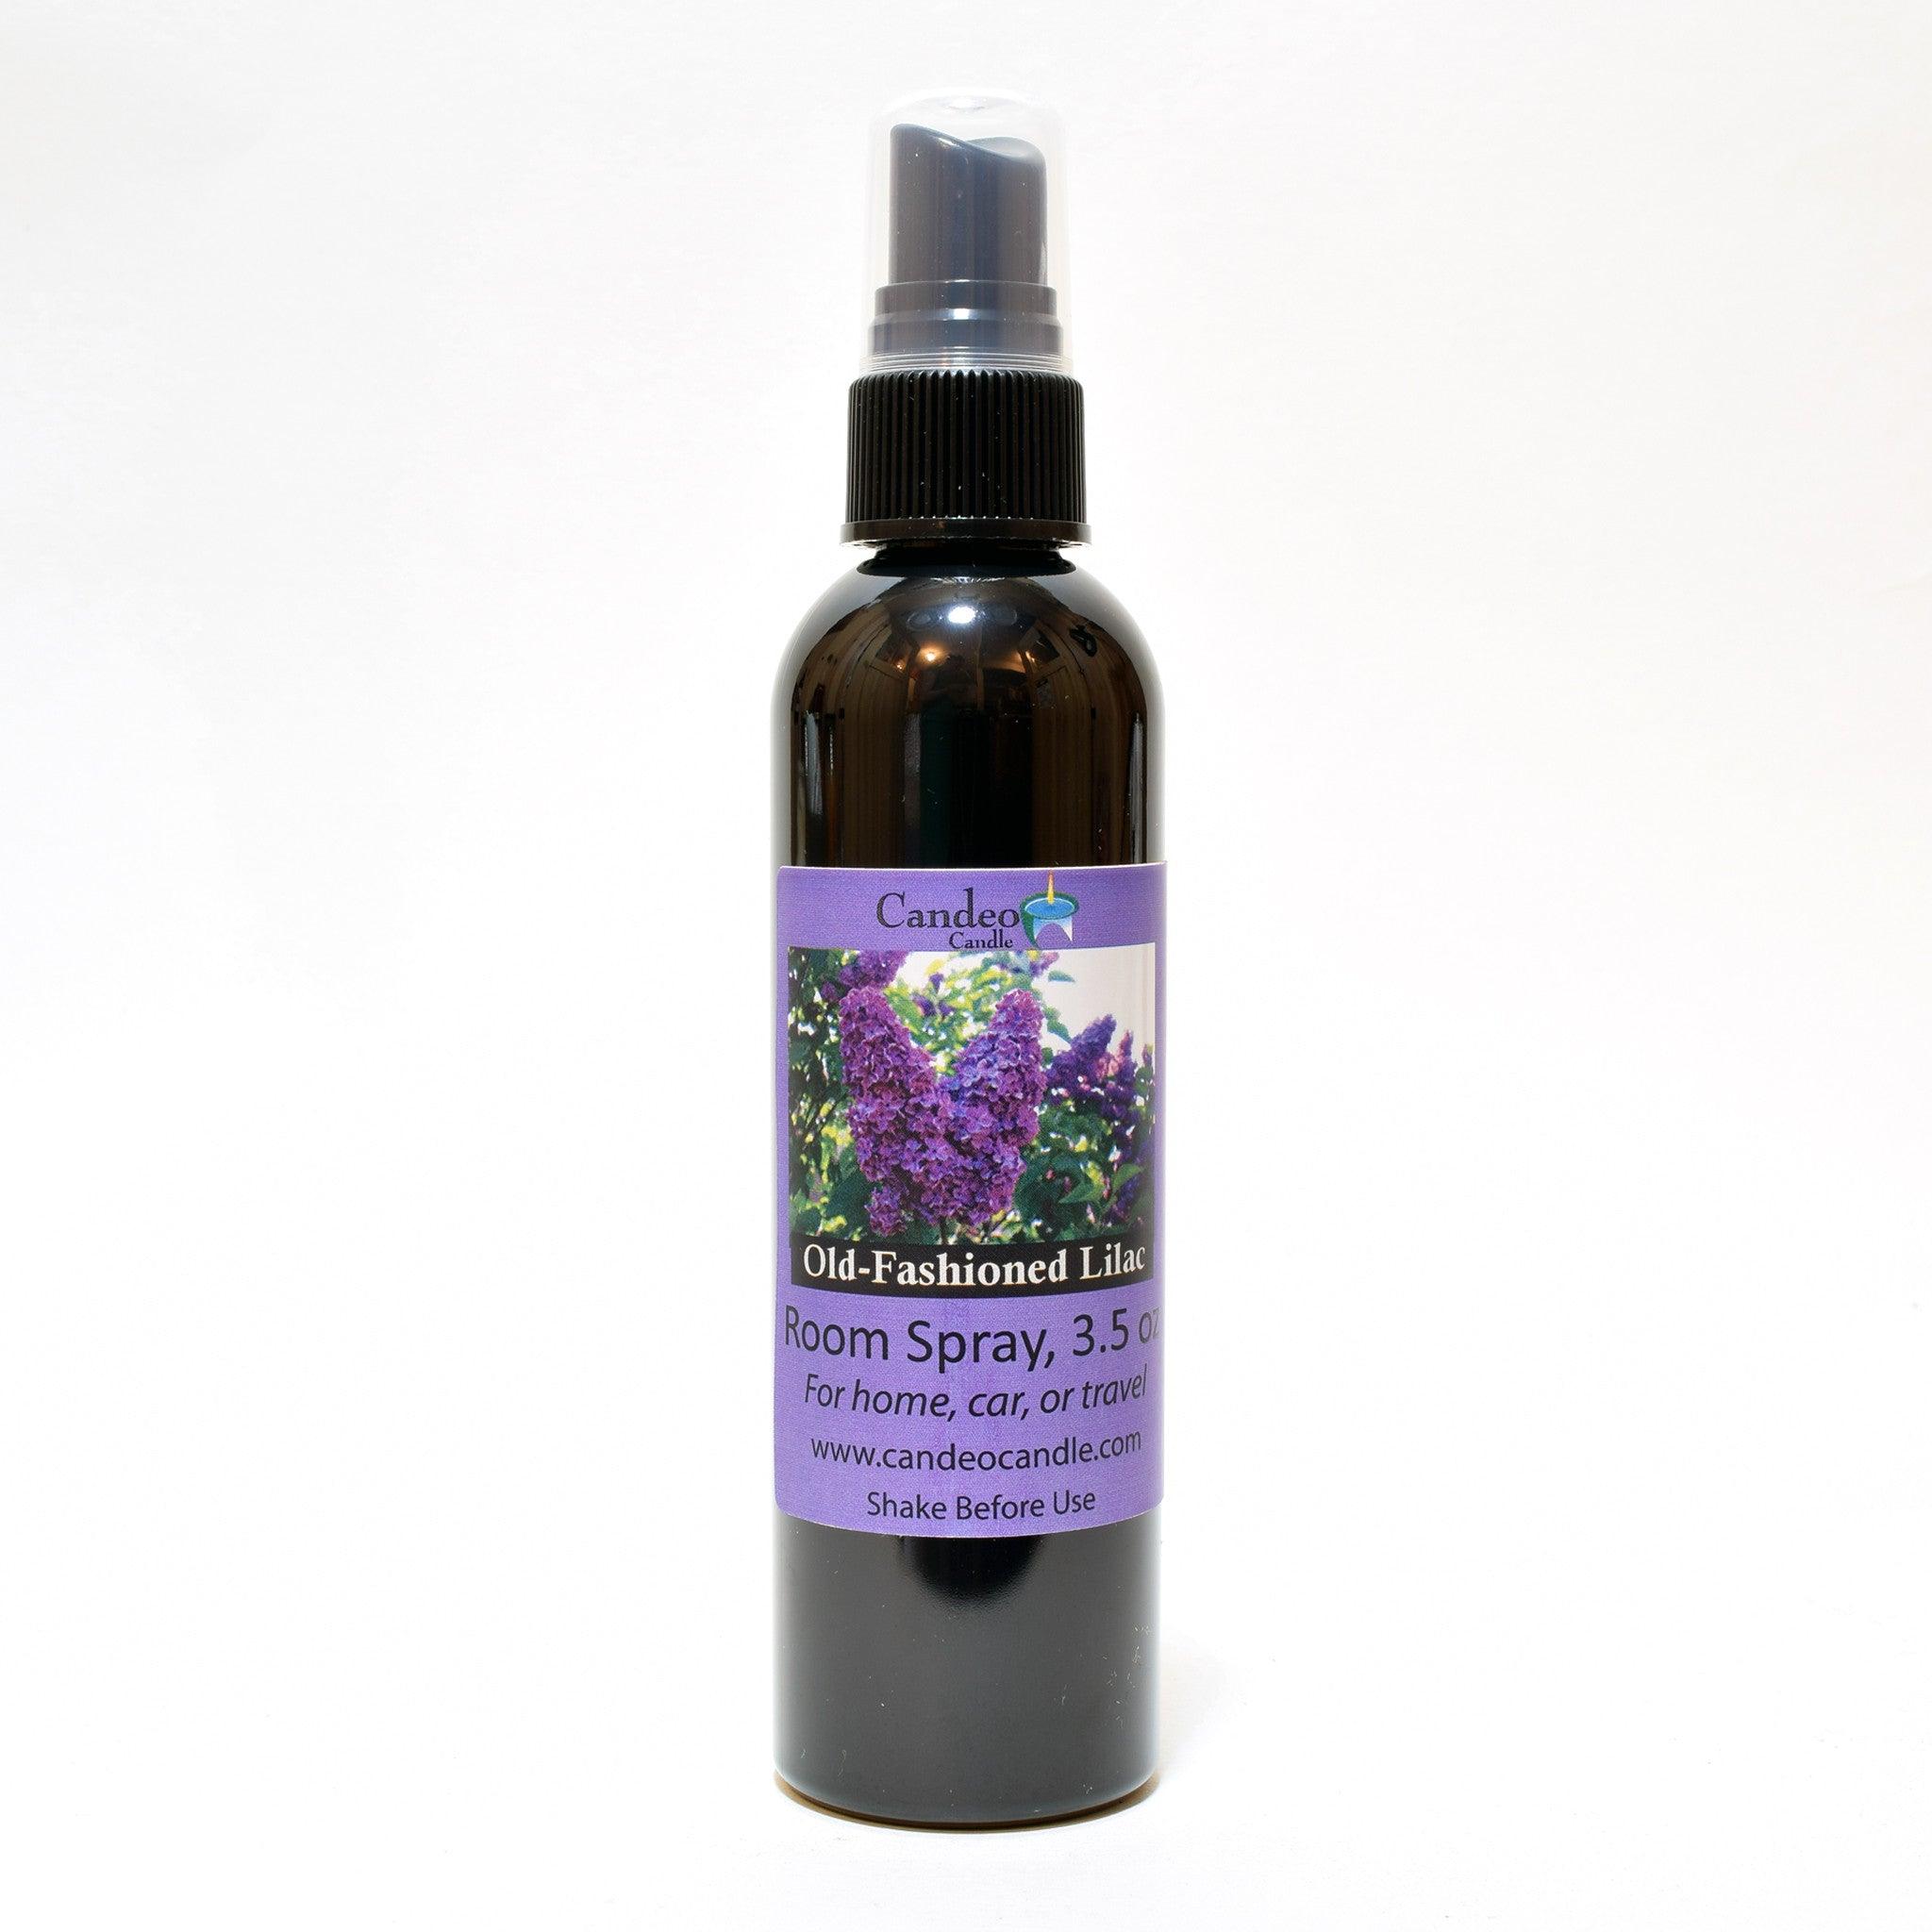 Old-Fashioned Lilac, 3.5 oz Room Spray - Candeo Candle